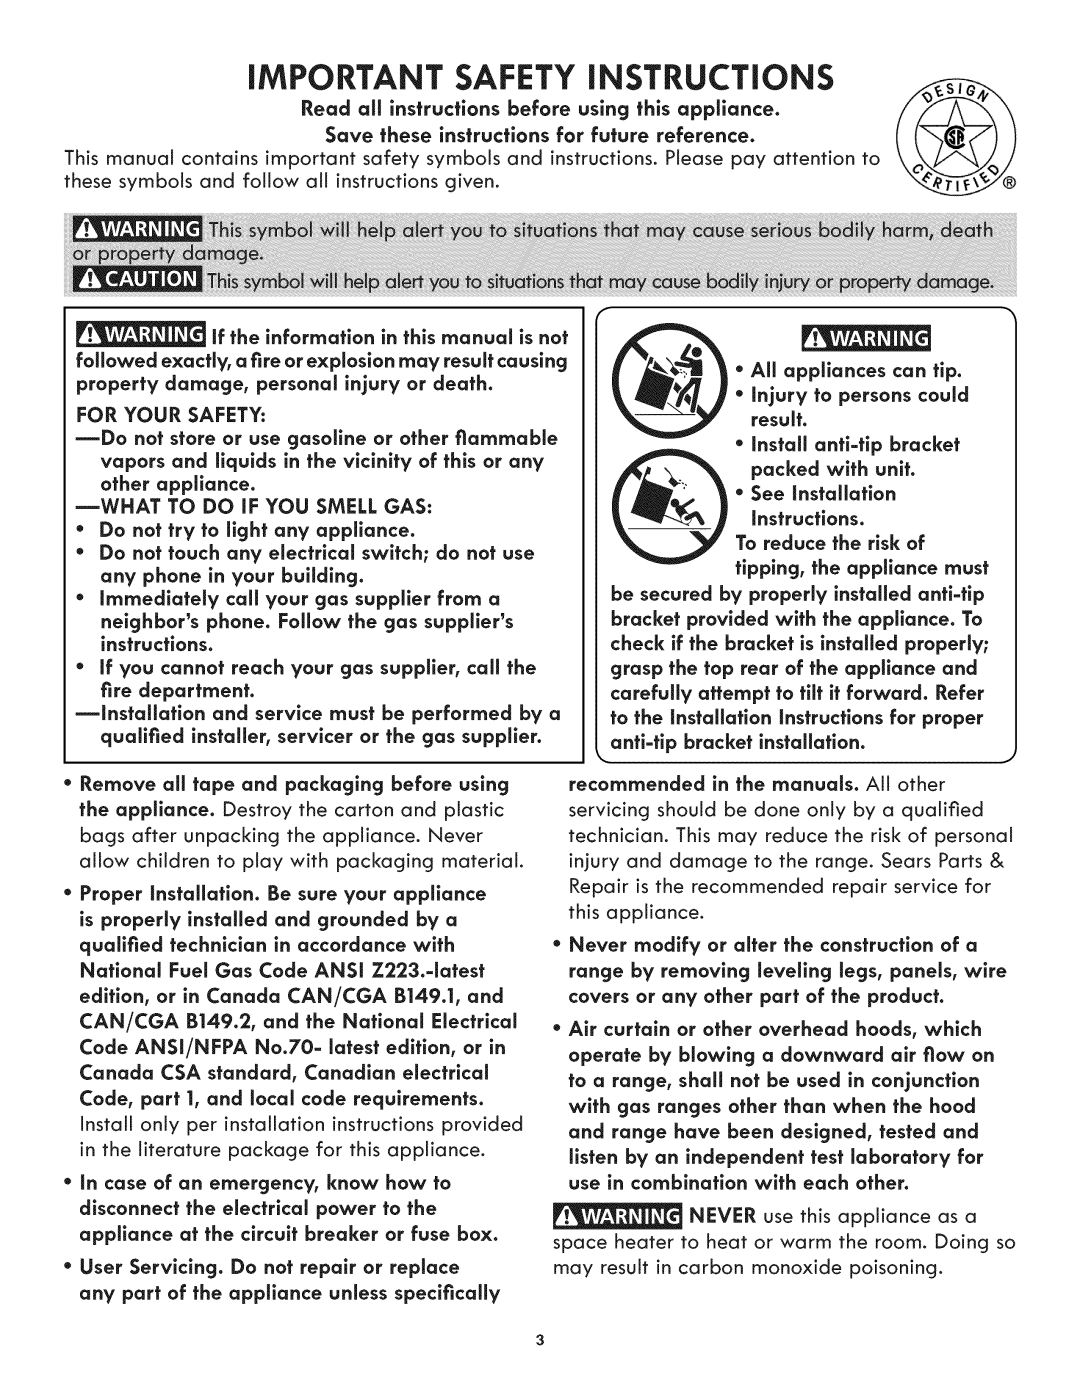 Kenmore 790.7890, 790.7892 manual beforeo,i.g hi,opplio=e, Readoil, iMPORTANT SAFETY iNSTRUCTiONS, edition 